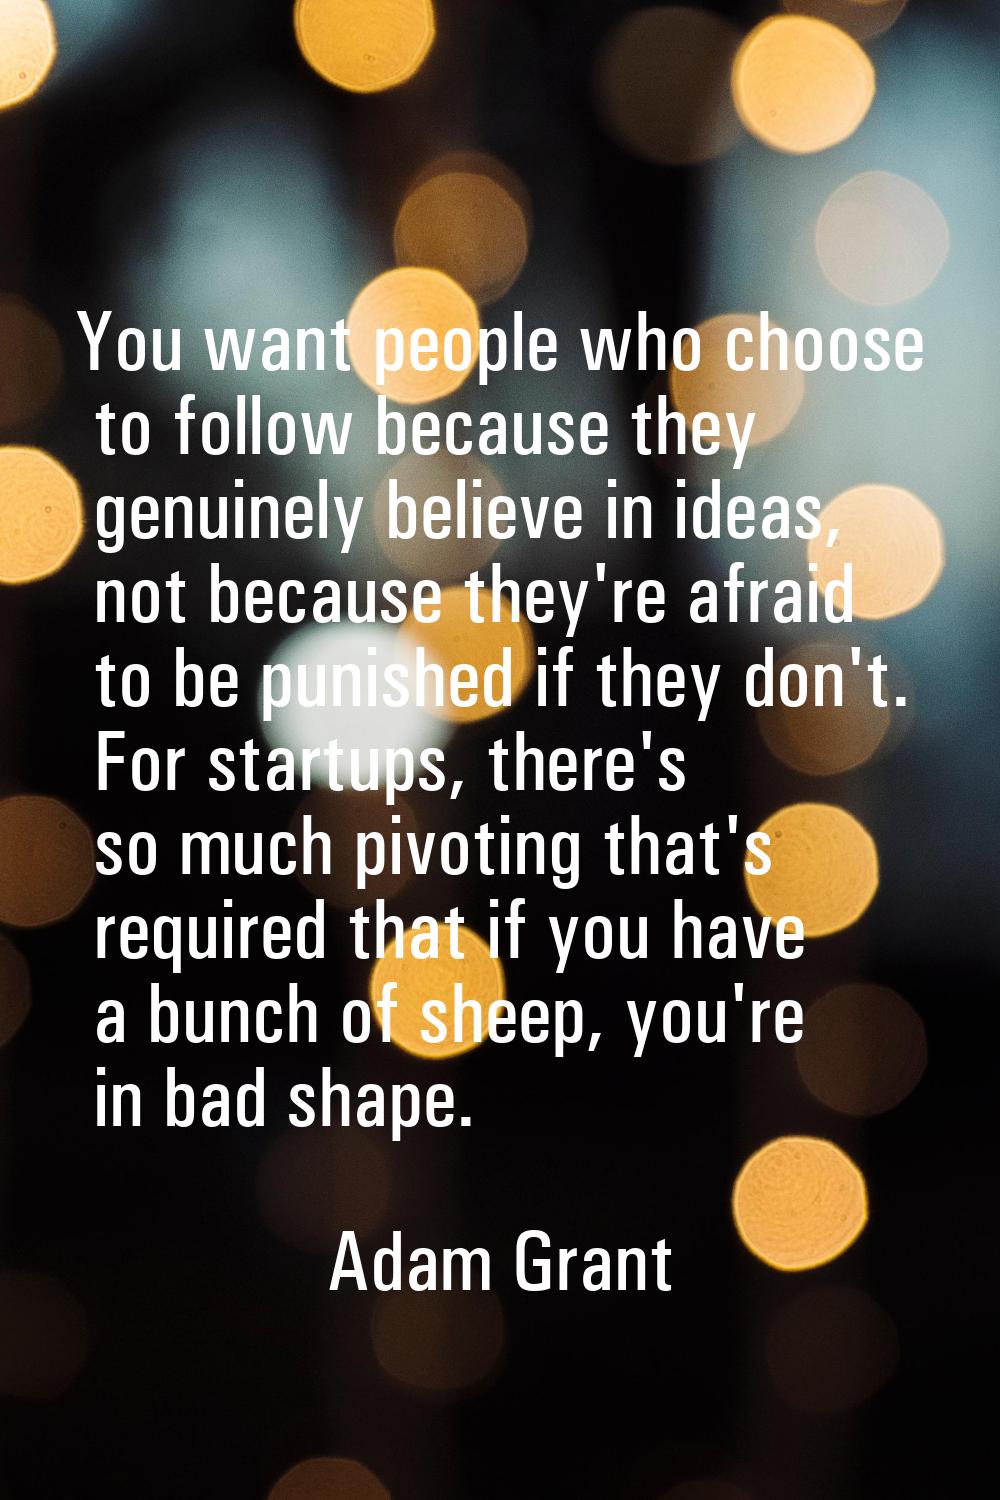 You want people who choose to follow because they genuinely believe in ideas, not because they're a